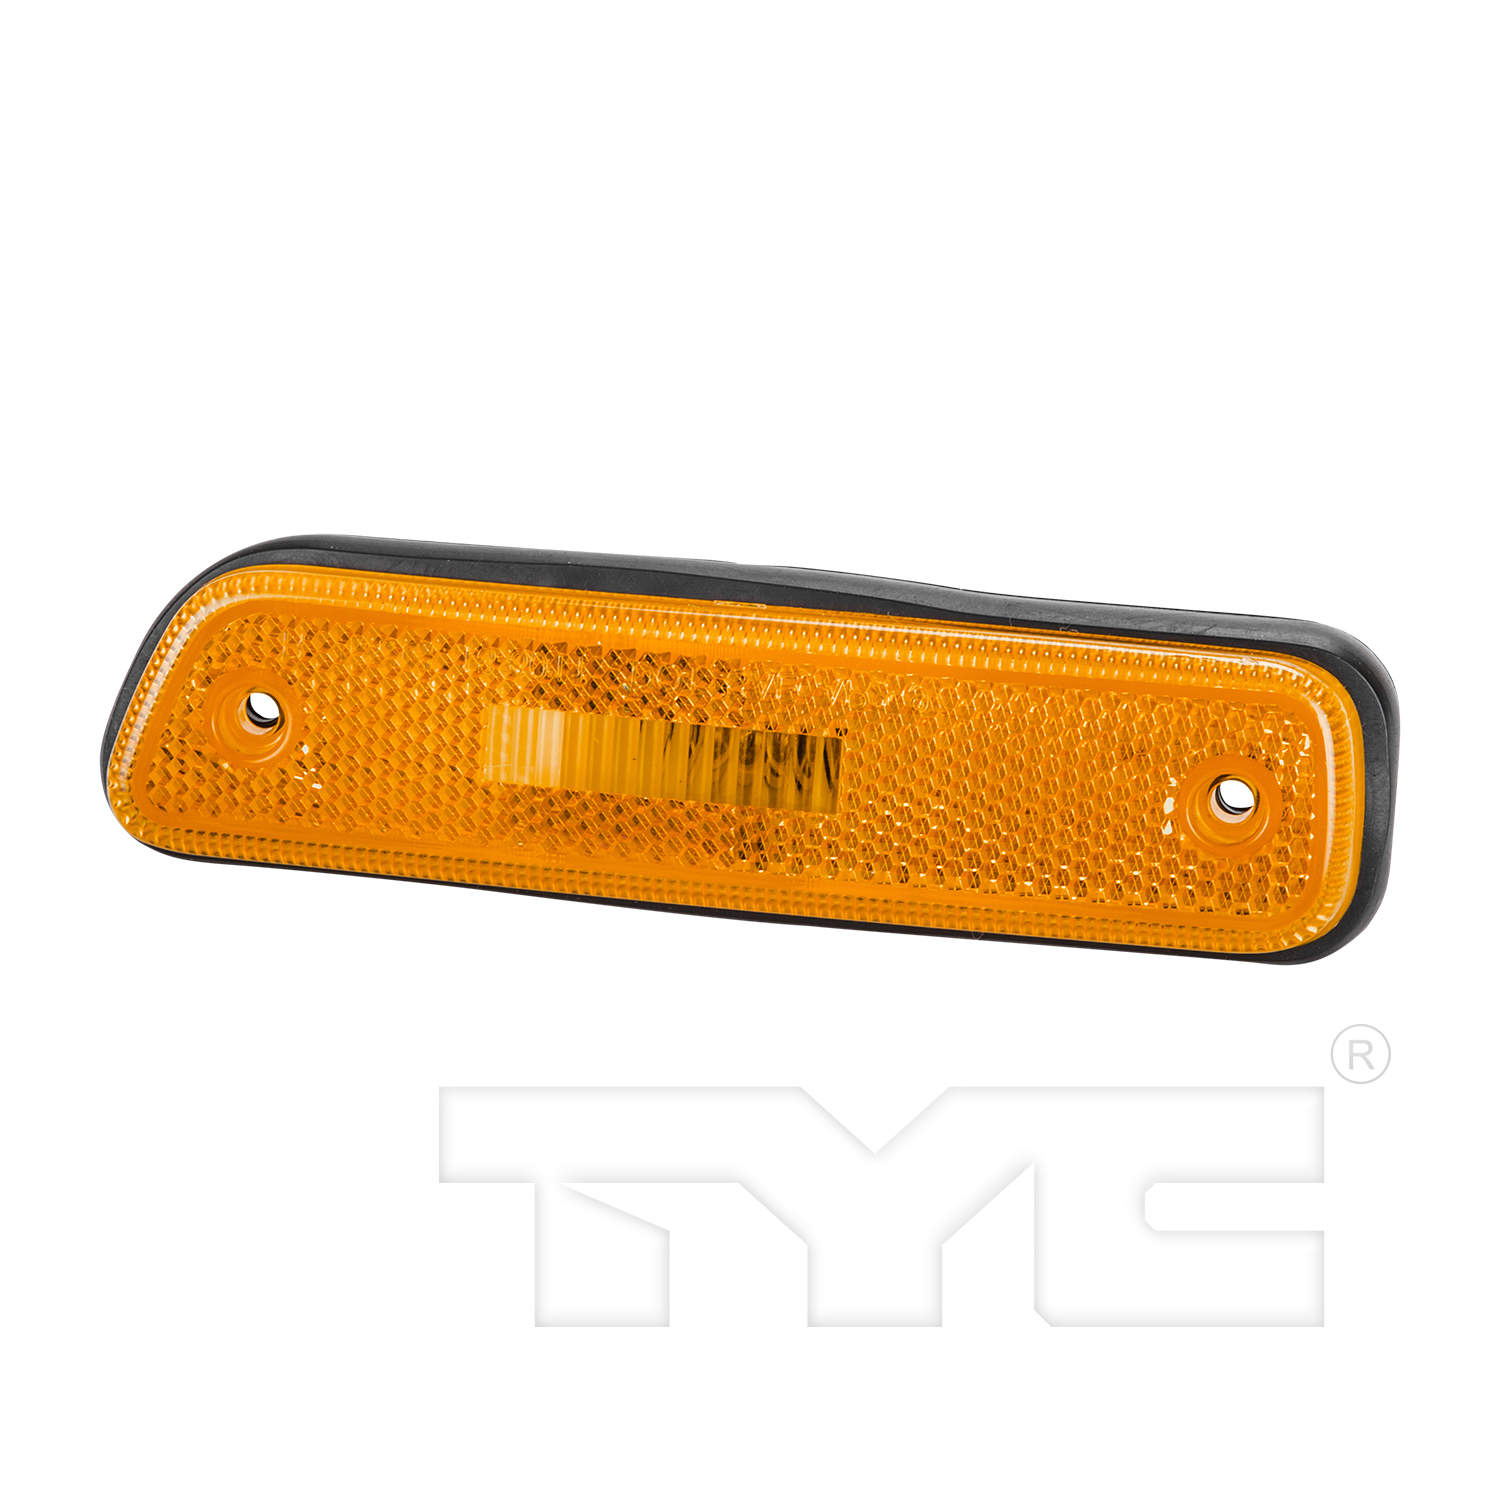 Aftermarket LAMPS for SUZUKI - XL-7, XL-7,02-05,LT Front marker lamp assy